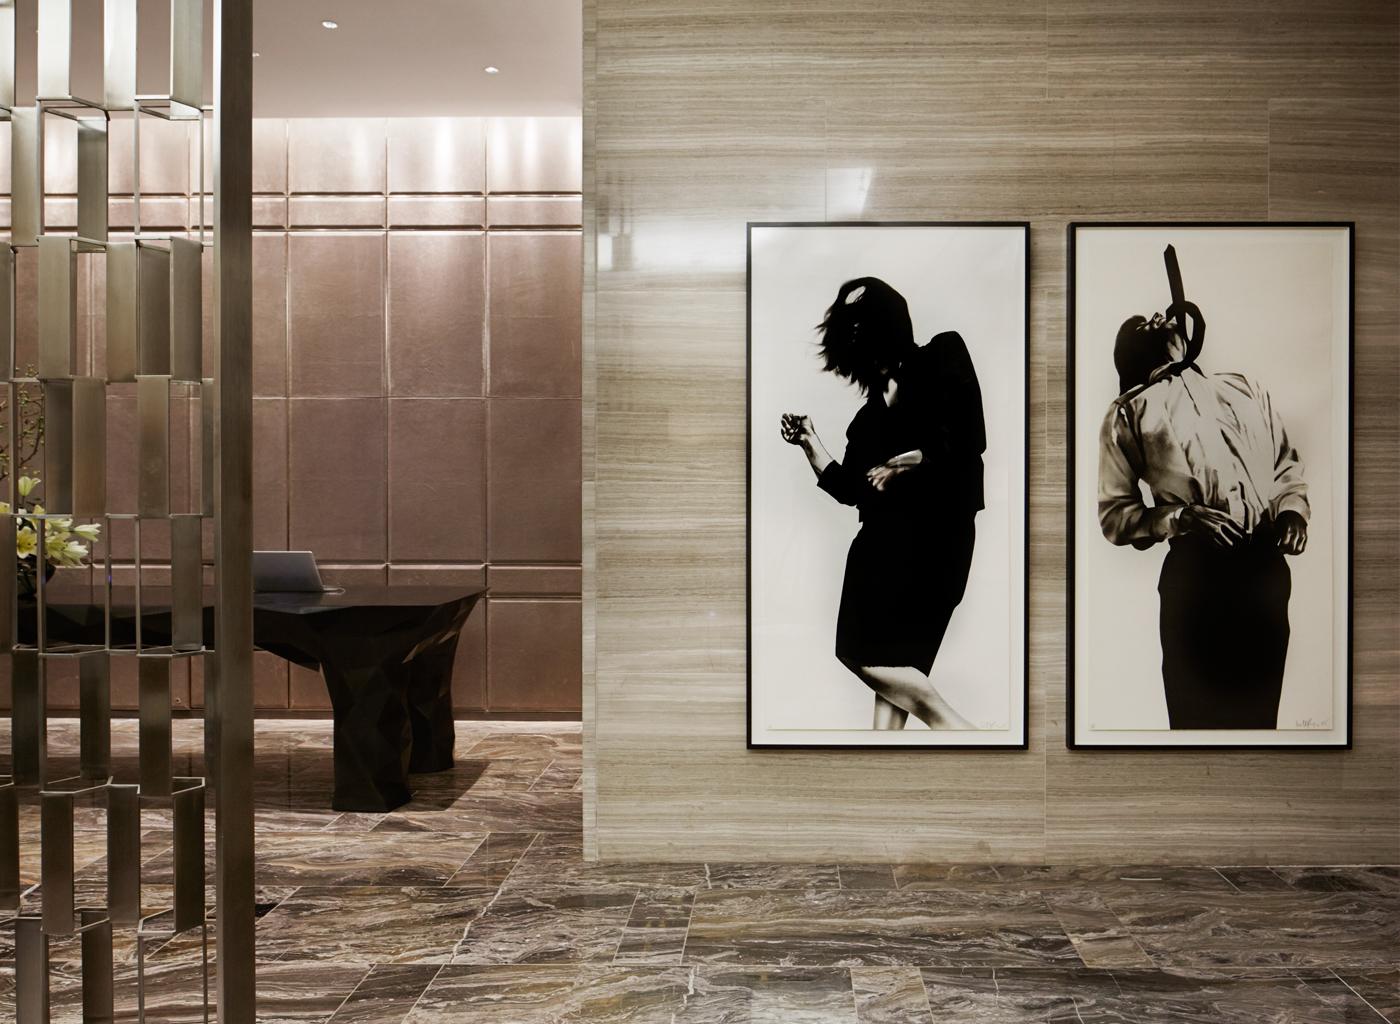                             Two works from Robert Longo&apos;s 1979 series &quot;Men in the Cities&quot; adorn a wall in the lobby of the Park Hyatt New York.